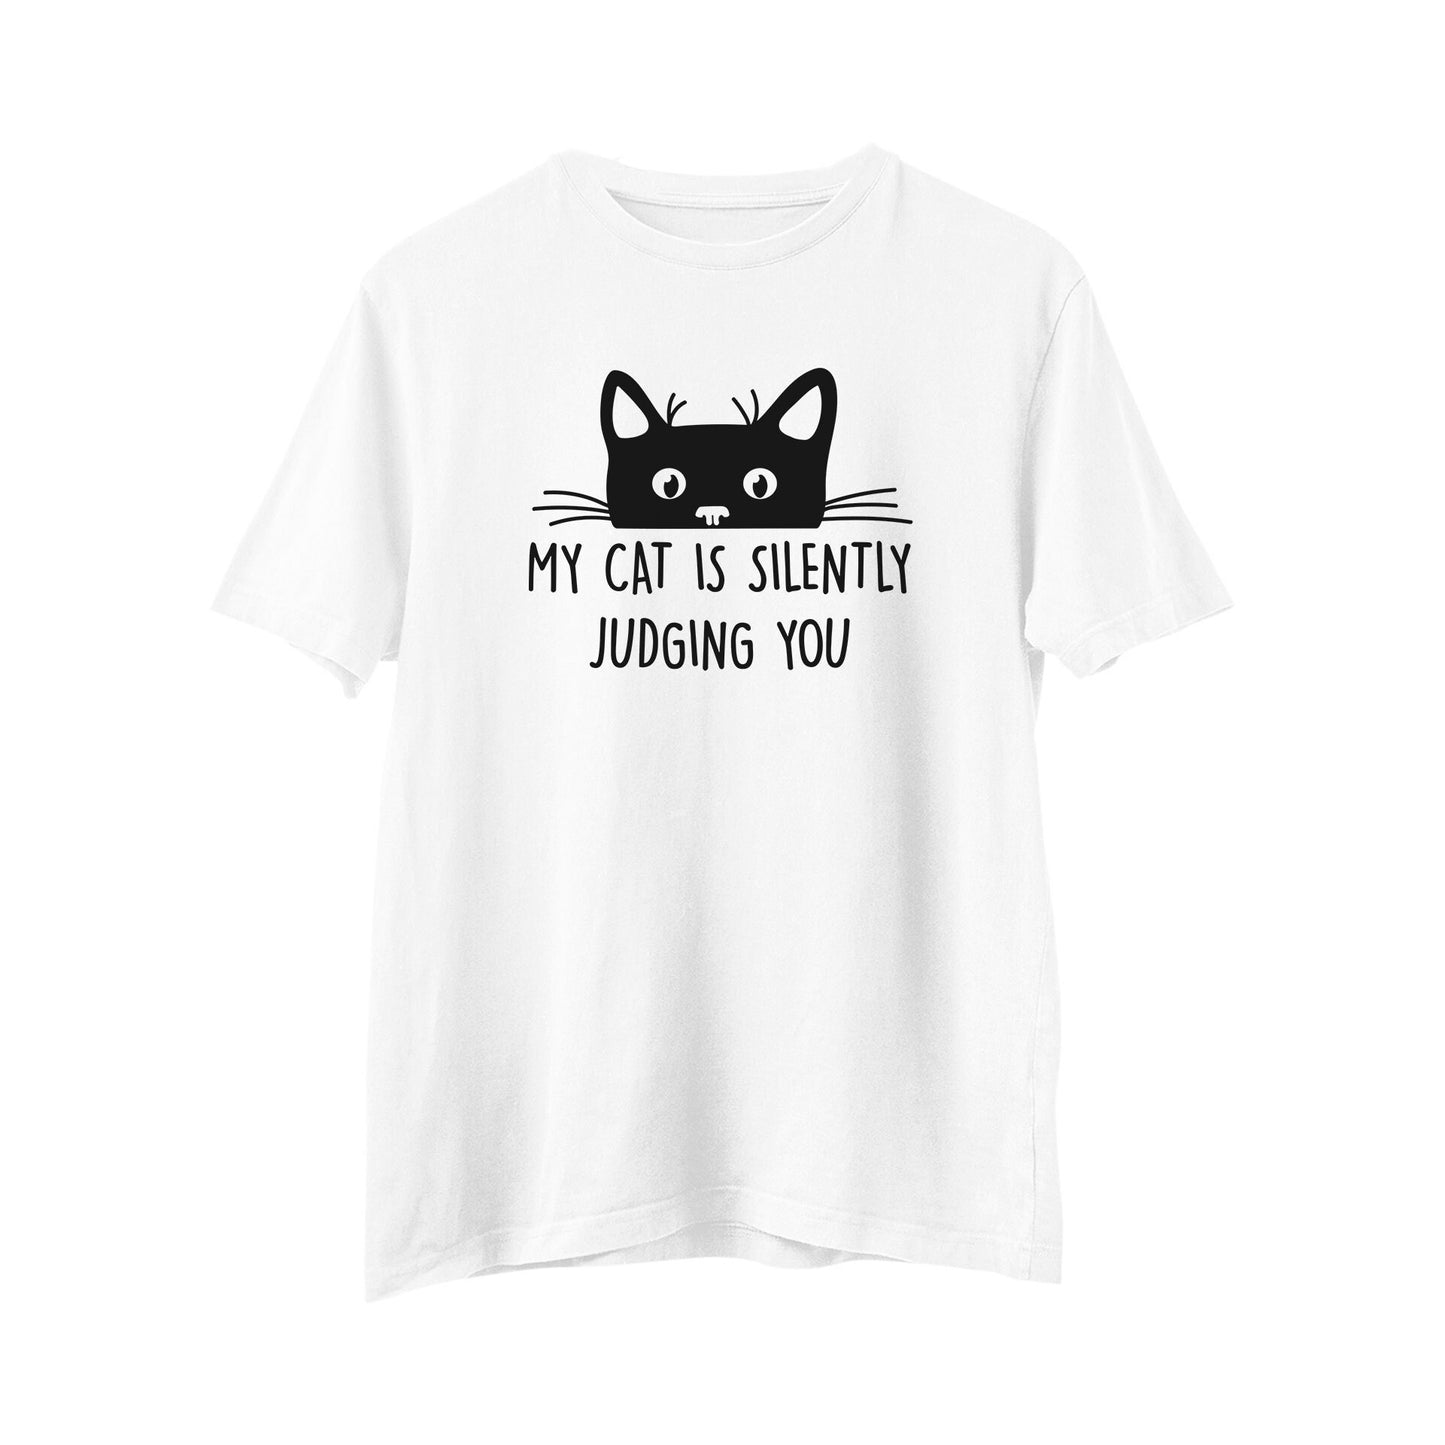 My Cat Is Silently Judging You T-shirt